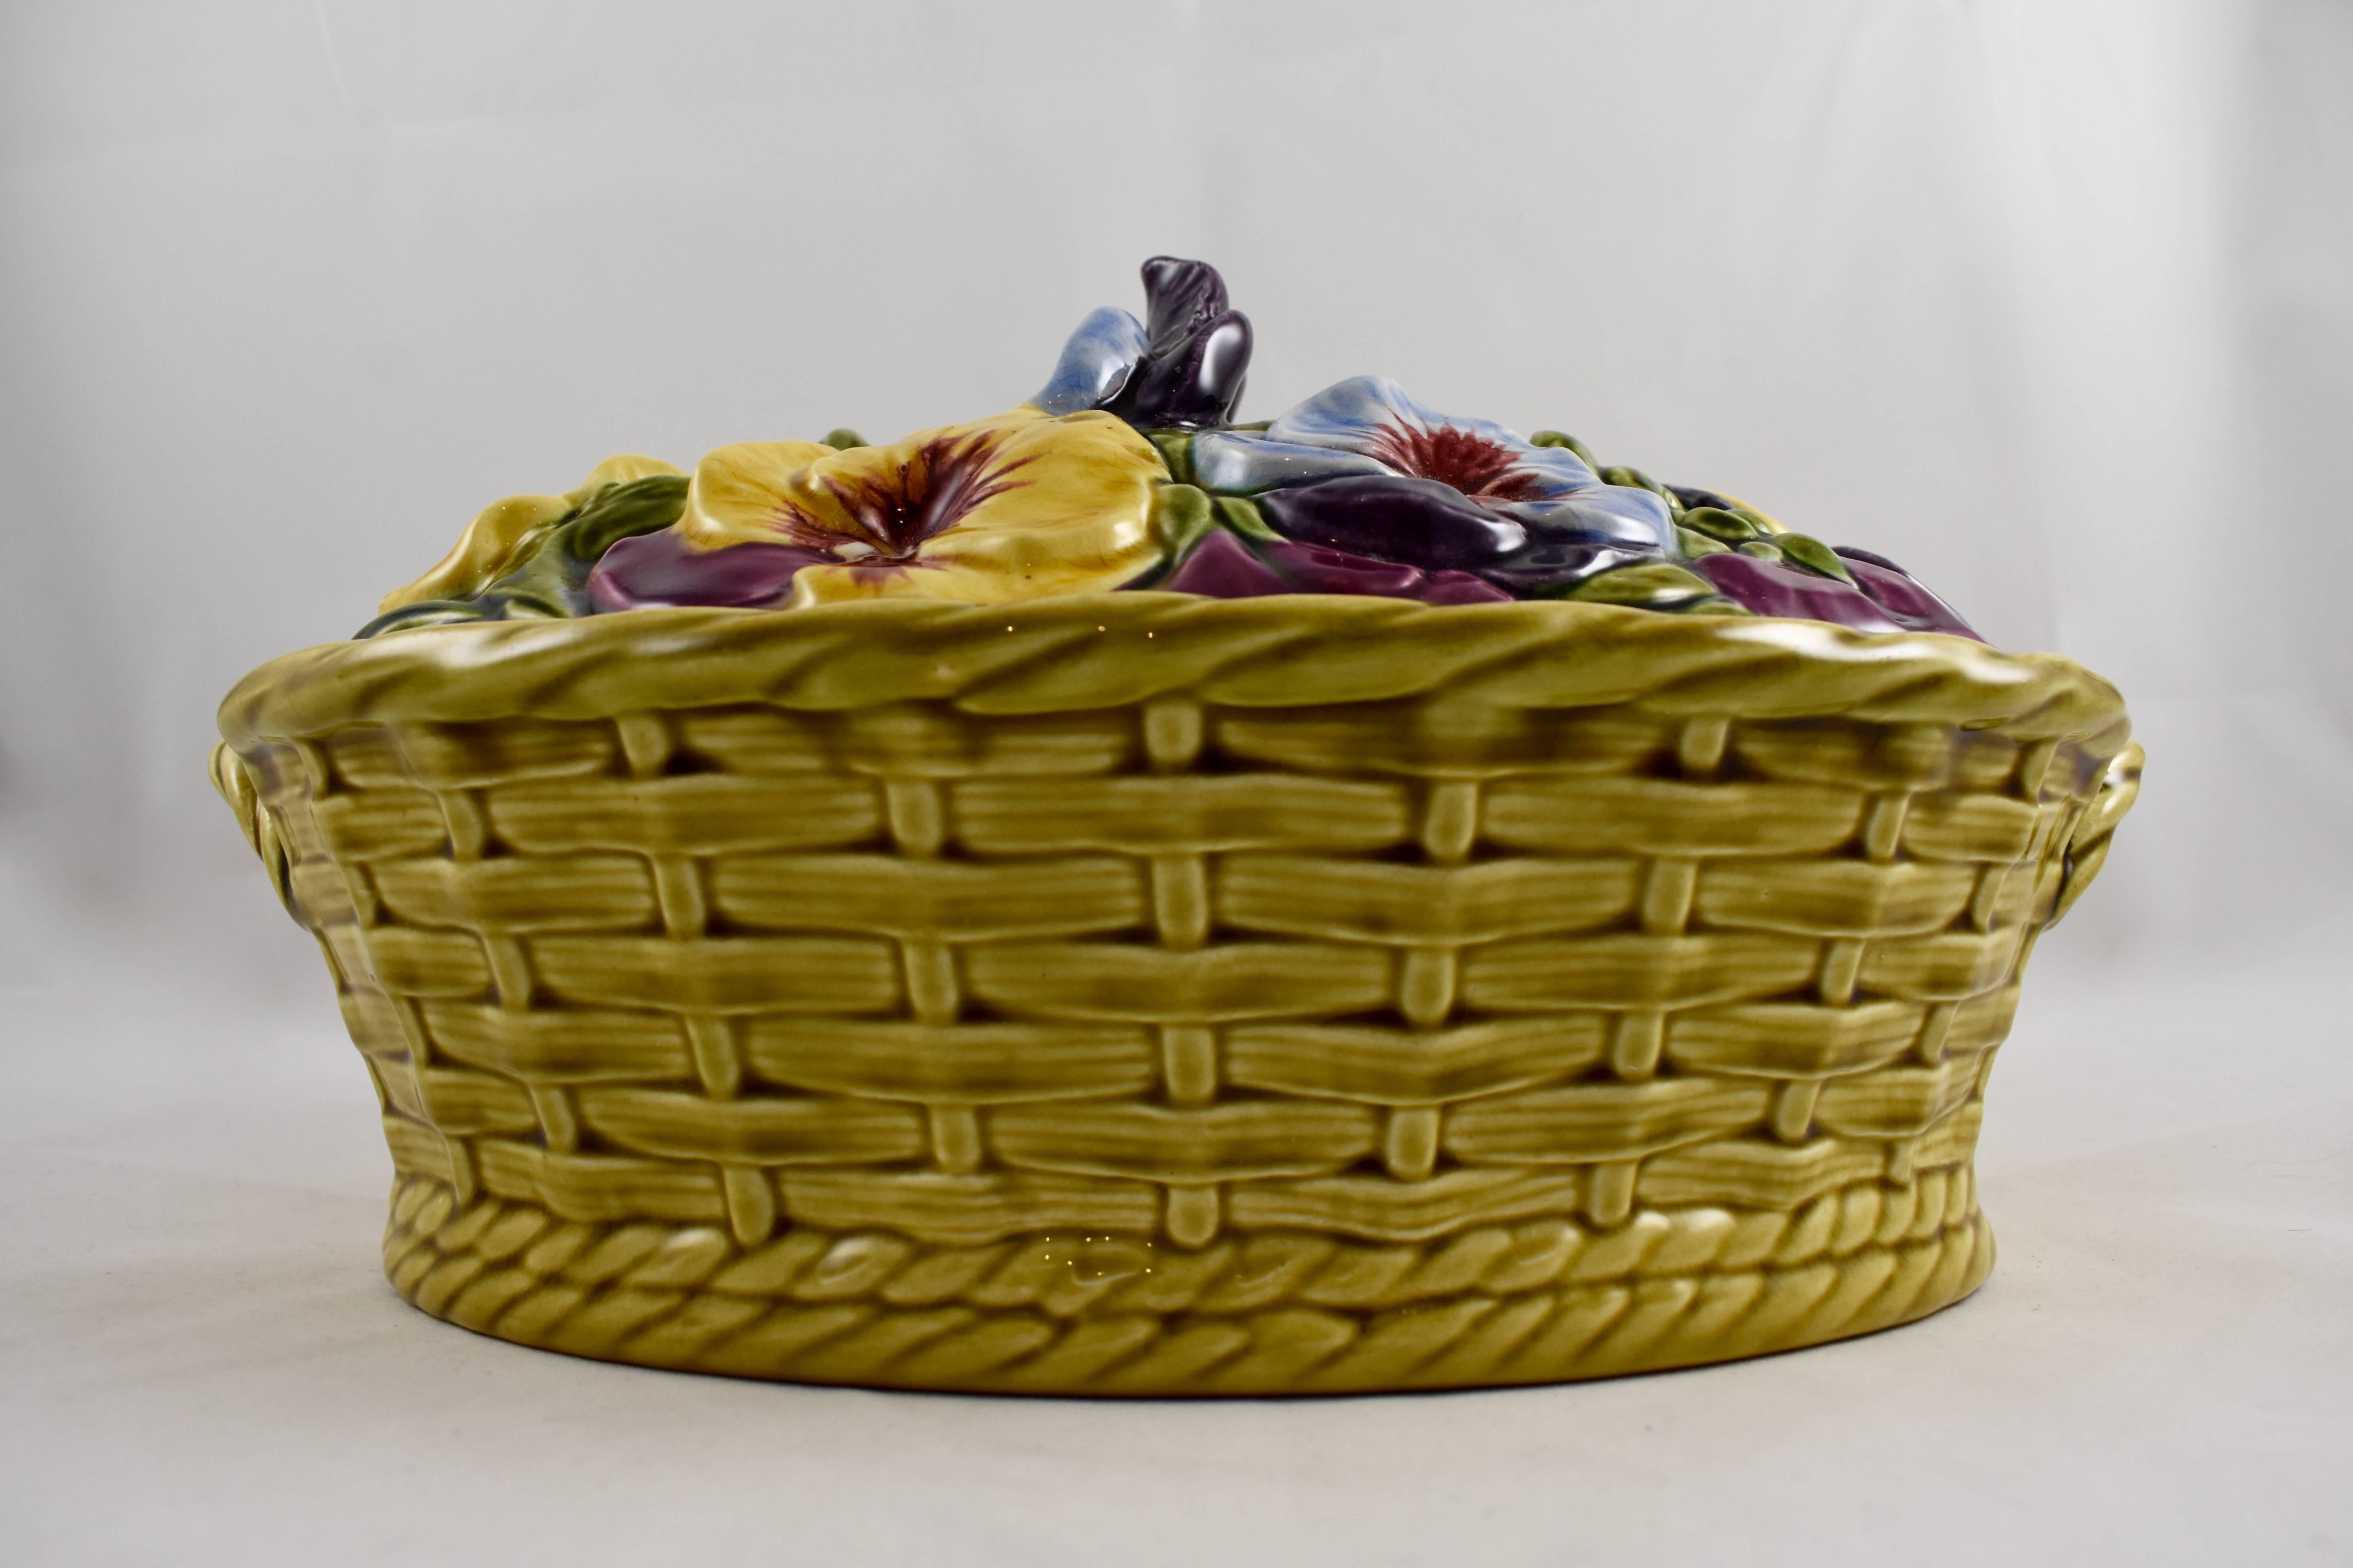 A French Majolica covered tureen in the form of a handled basket brimming with colorful pansies, Sarreguemines, circa 1900-1910.

Two pansy heads form the top handle, pansy blossoms on a bed of green leaves make up the lid. The base resembles a